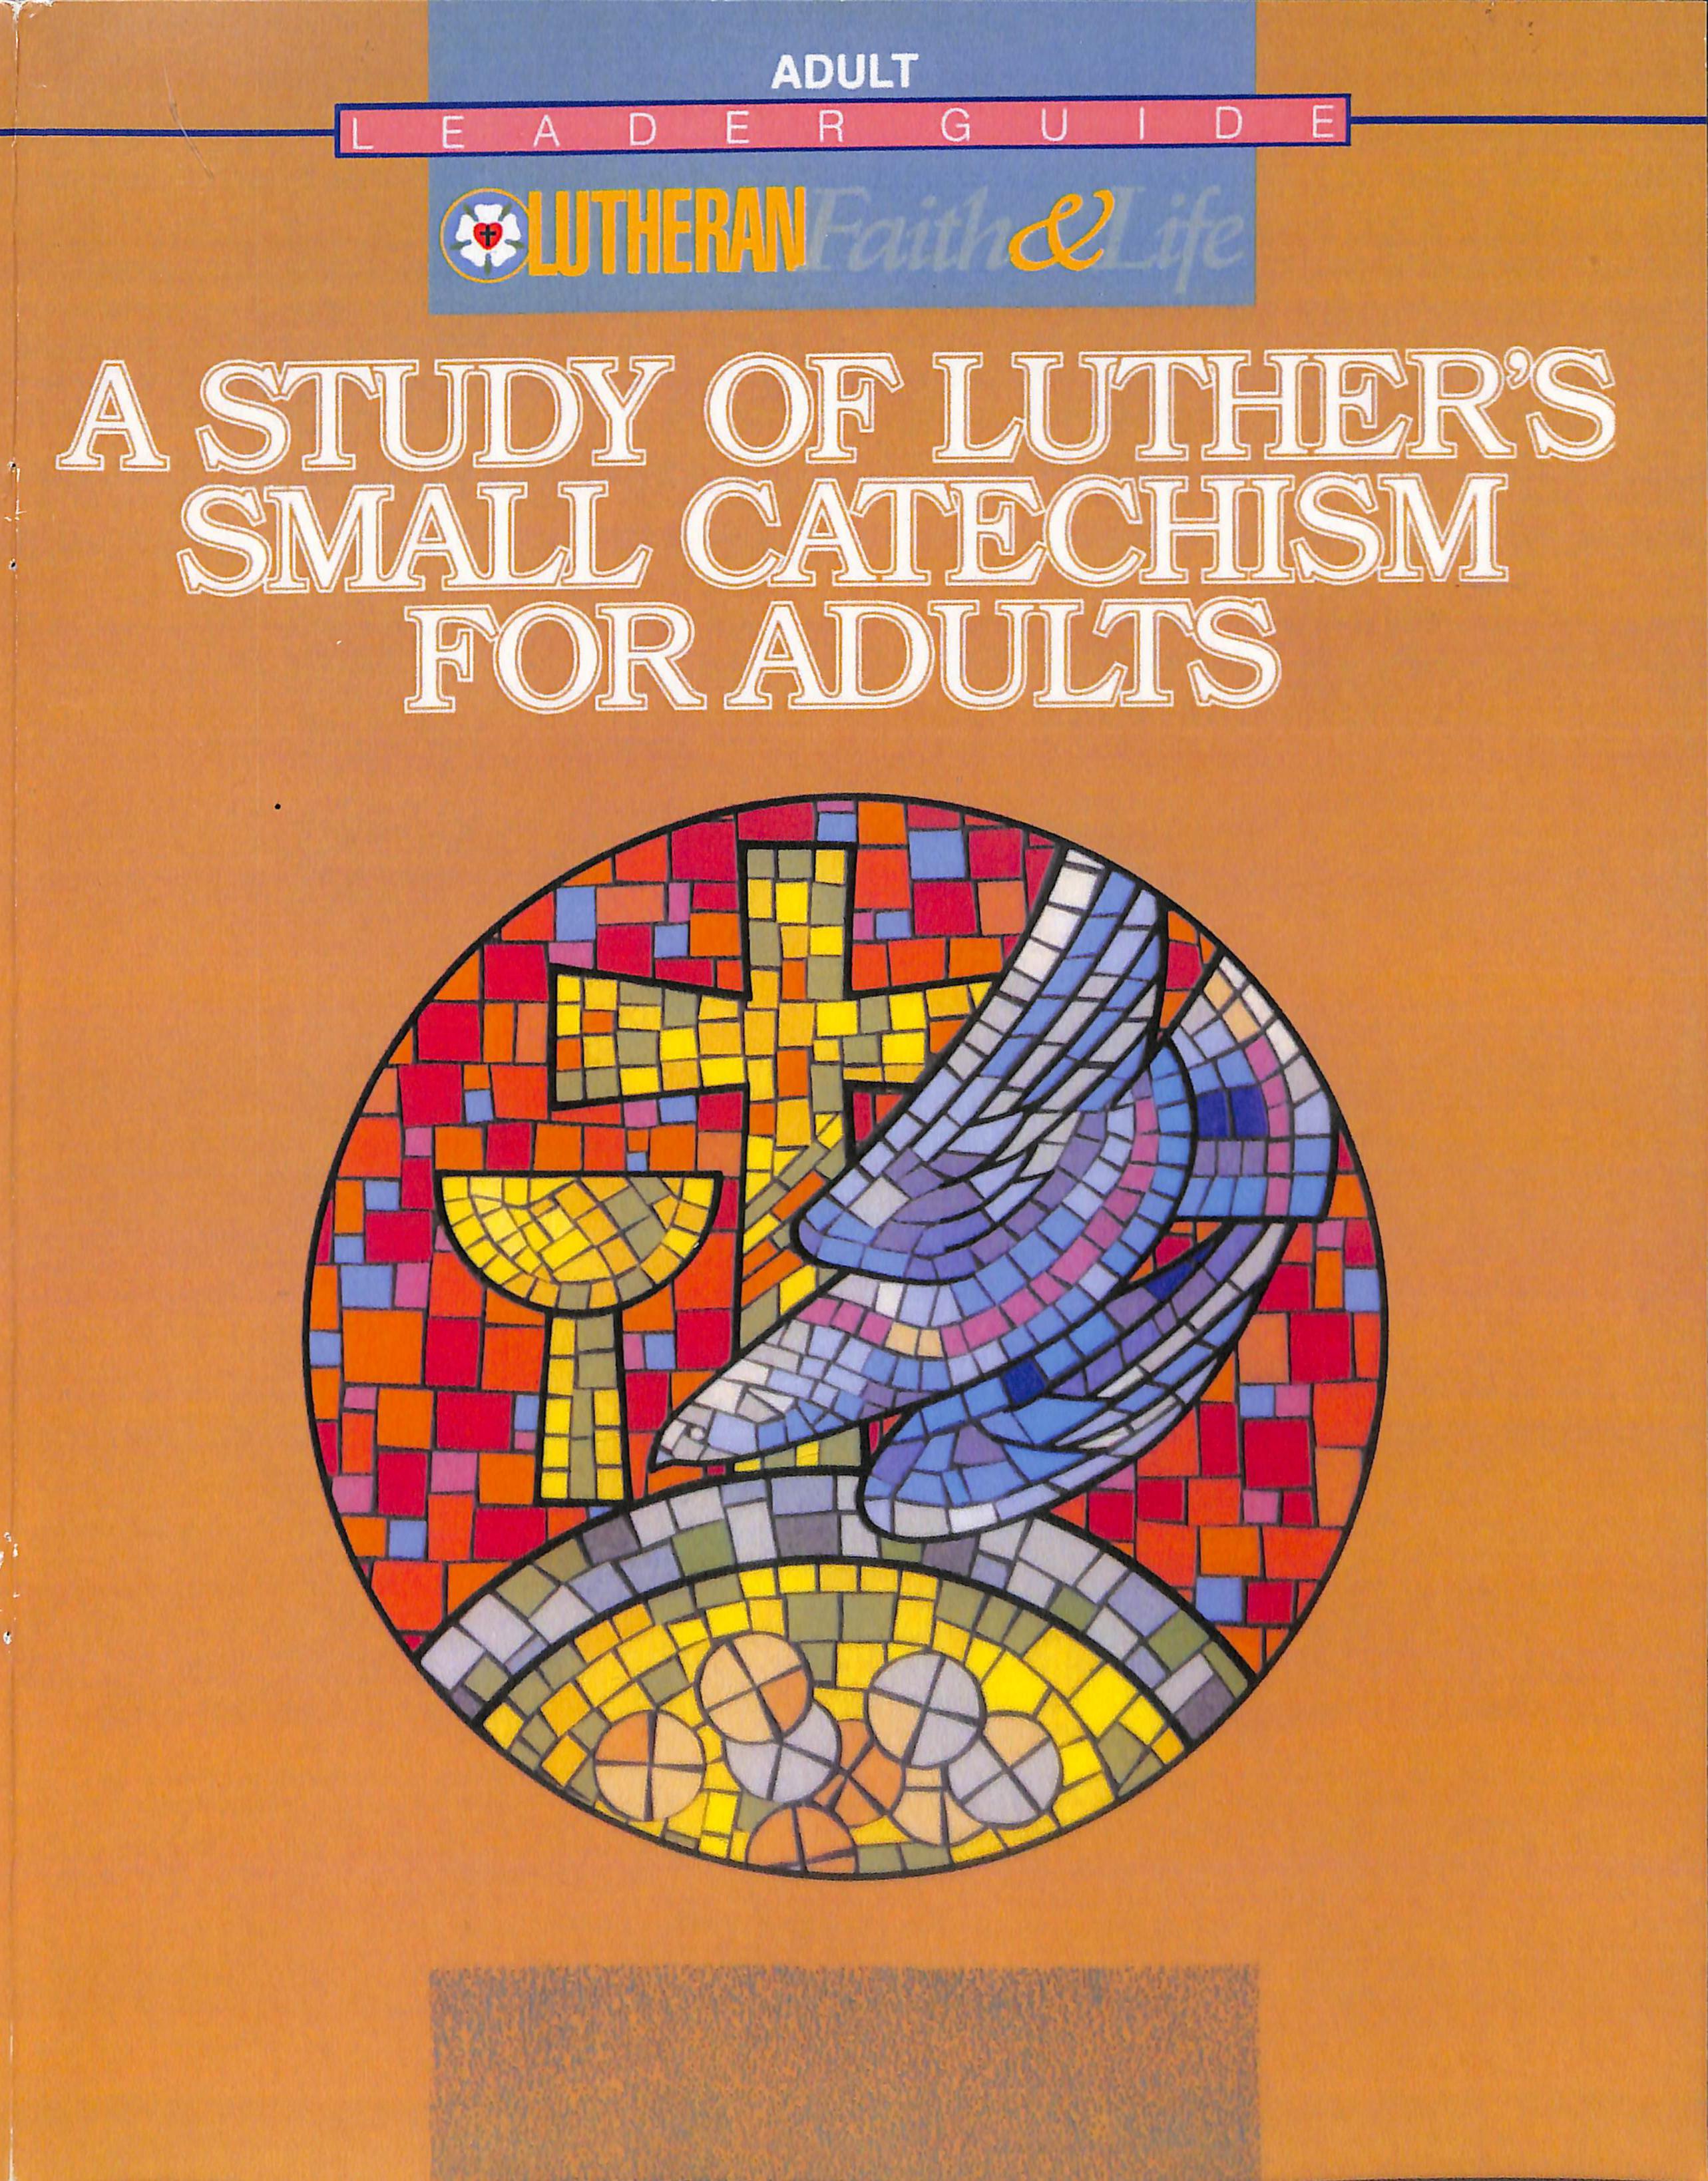 A Study of Luther's Small Catechism for Adults, Leader Guide